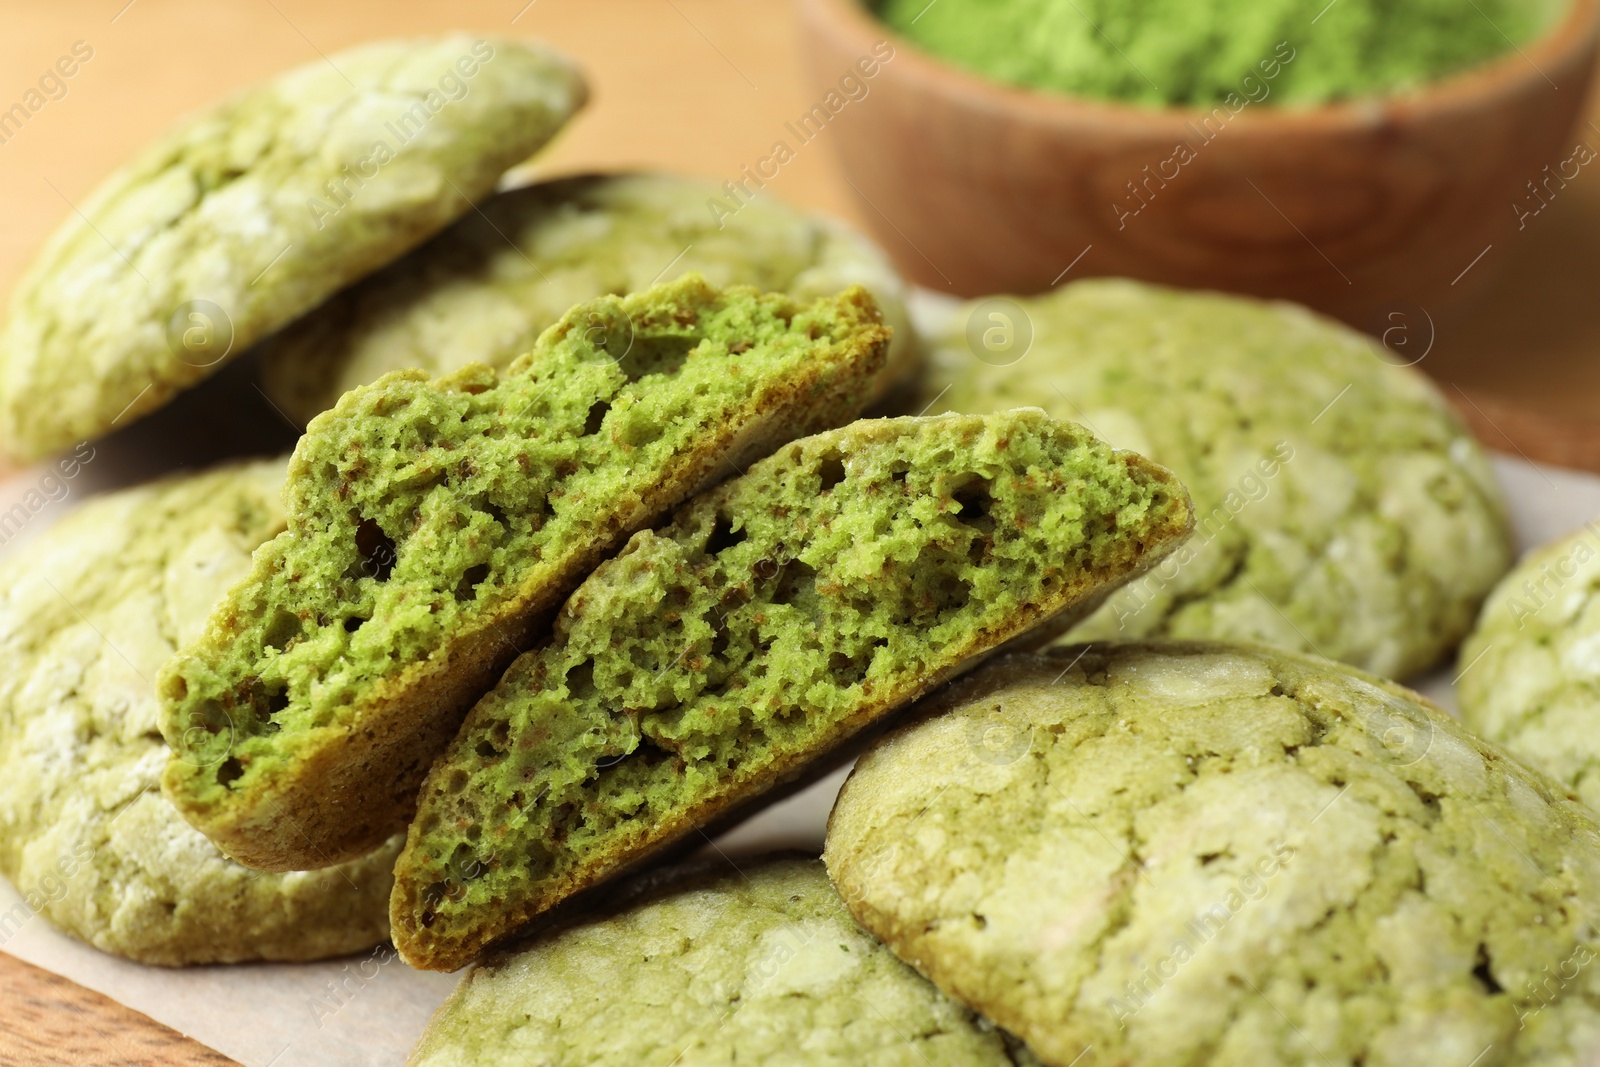 Photo of Tasty matcha cookies on table, closeup view